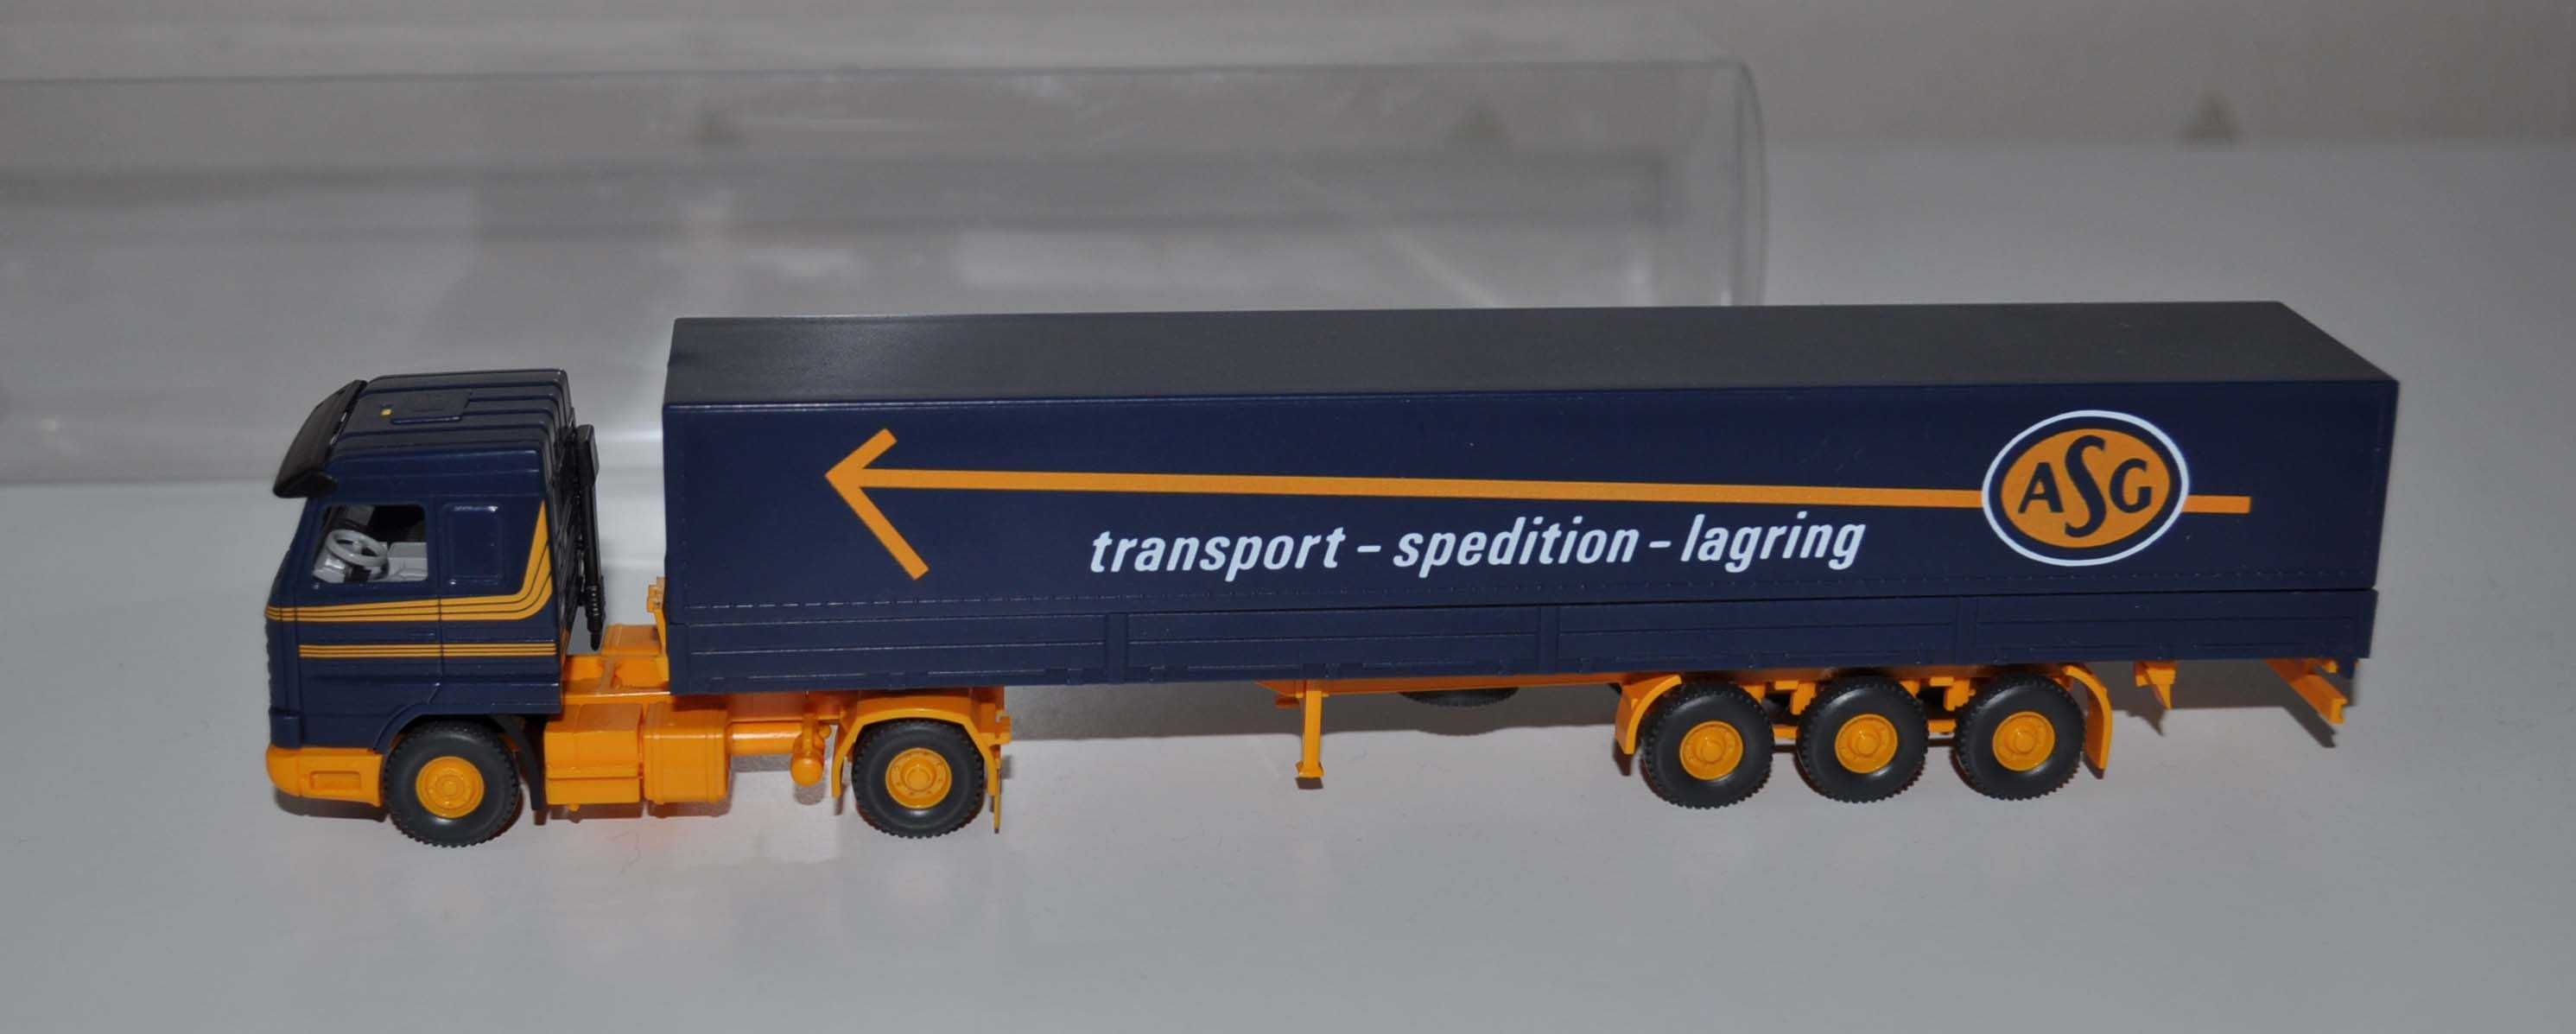 Scania 143 Wiking 1/87 ASG Transport Spedition Lagring